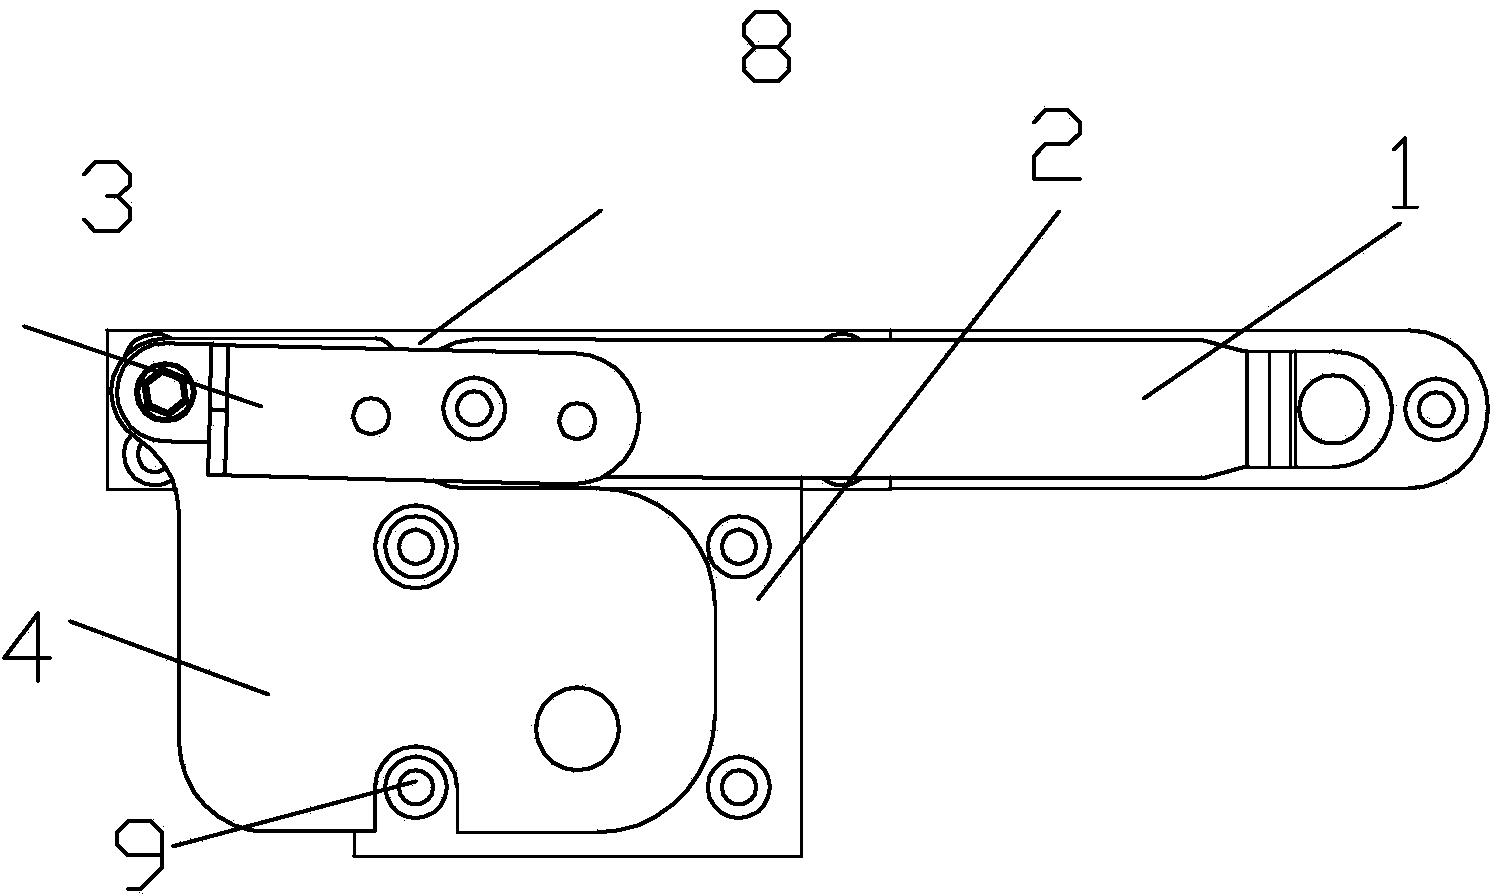 Window with hinge assemblies capable of being hidden